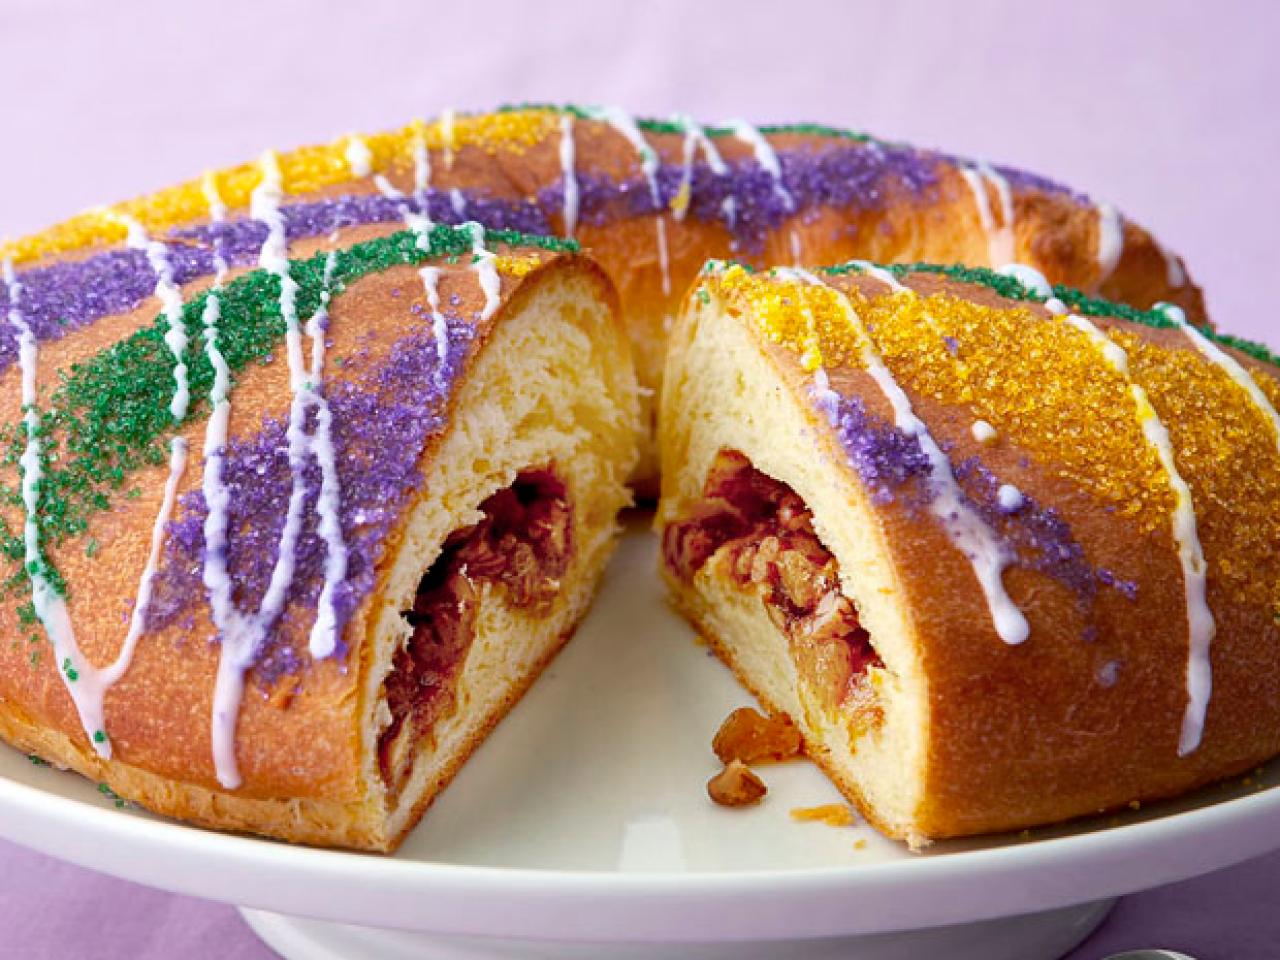 10 nola-inspired recipes to make for mardi gras | fn dish - behind